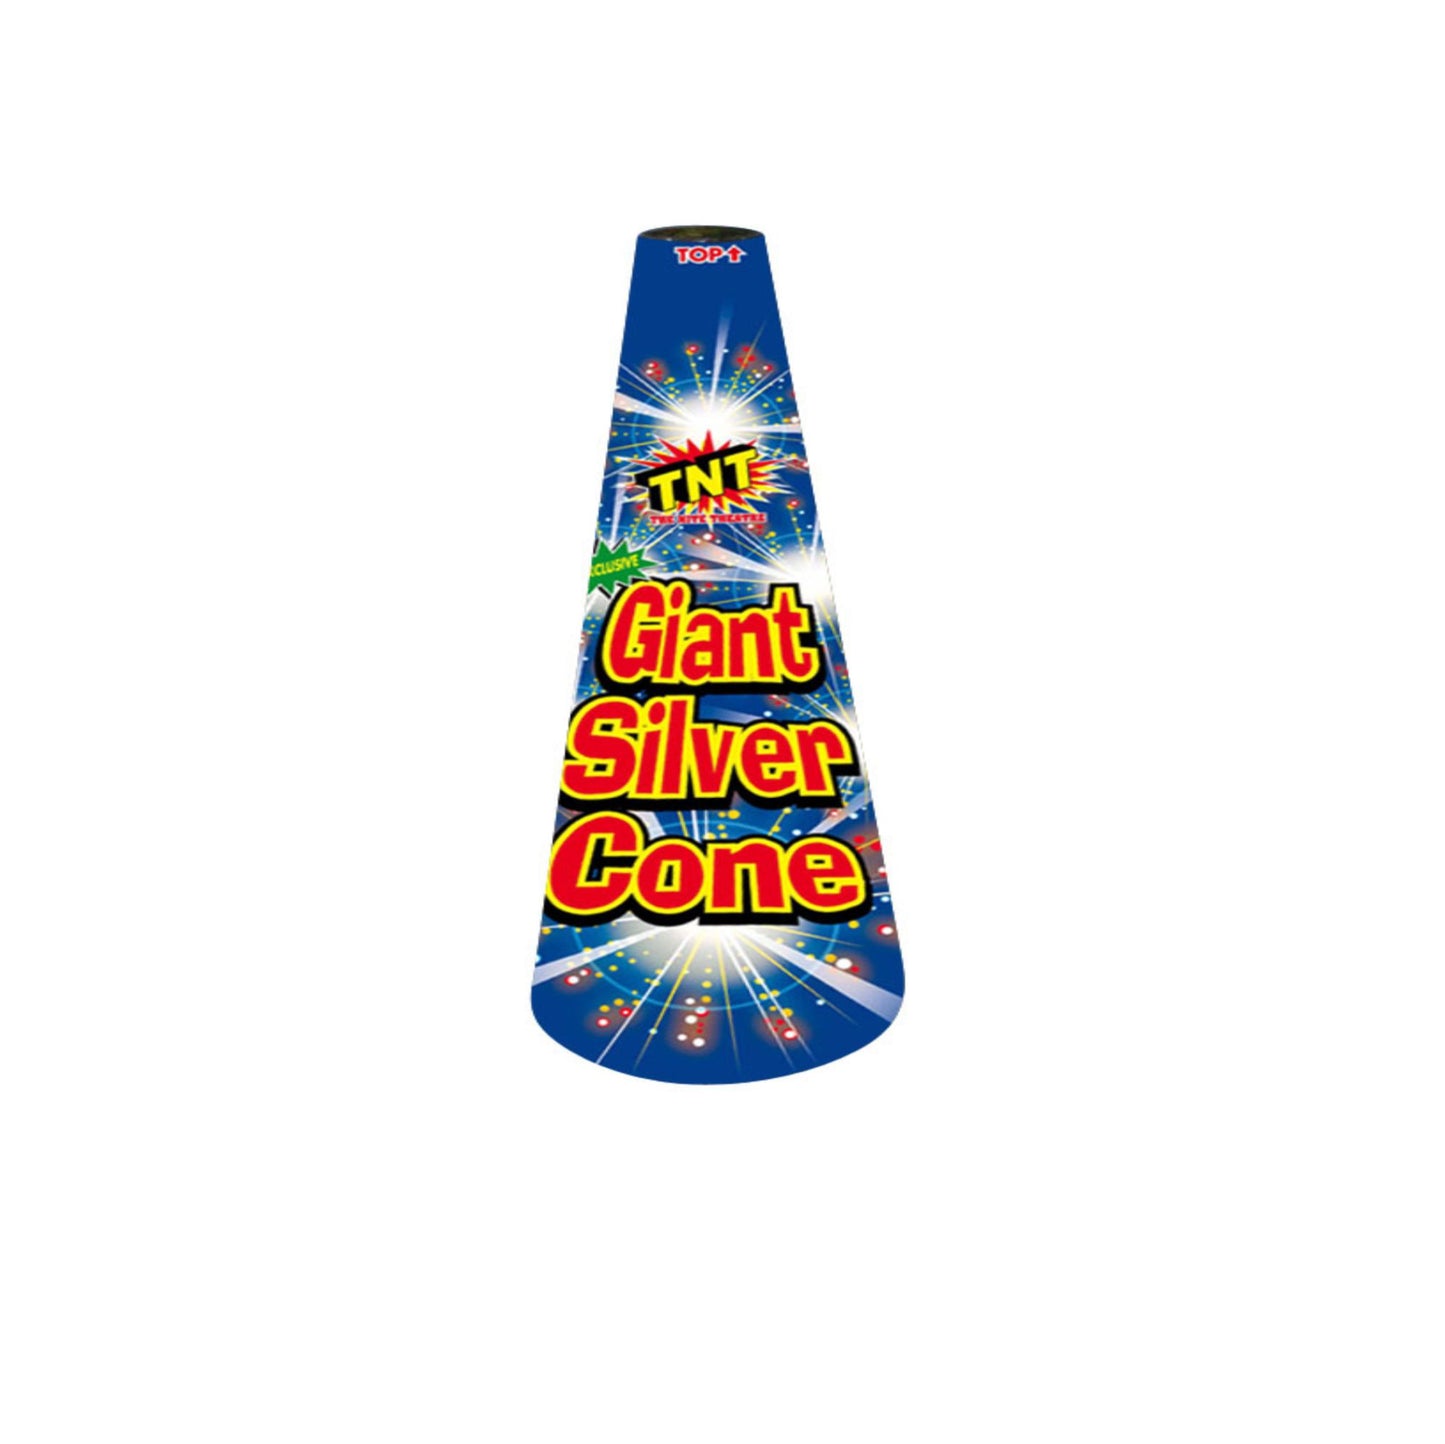 Giant Silver Cone